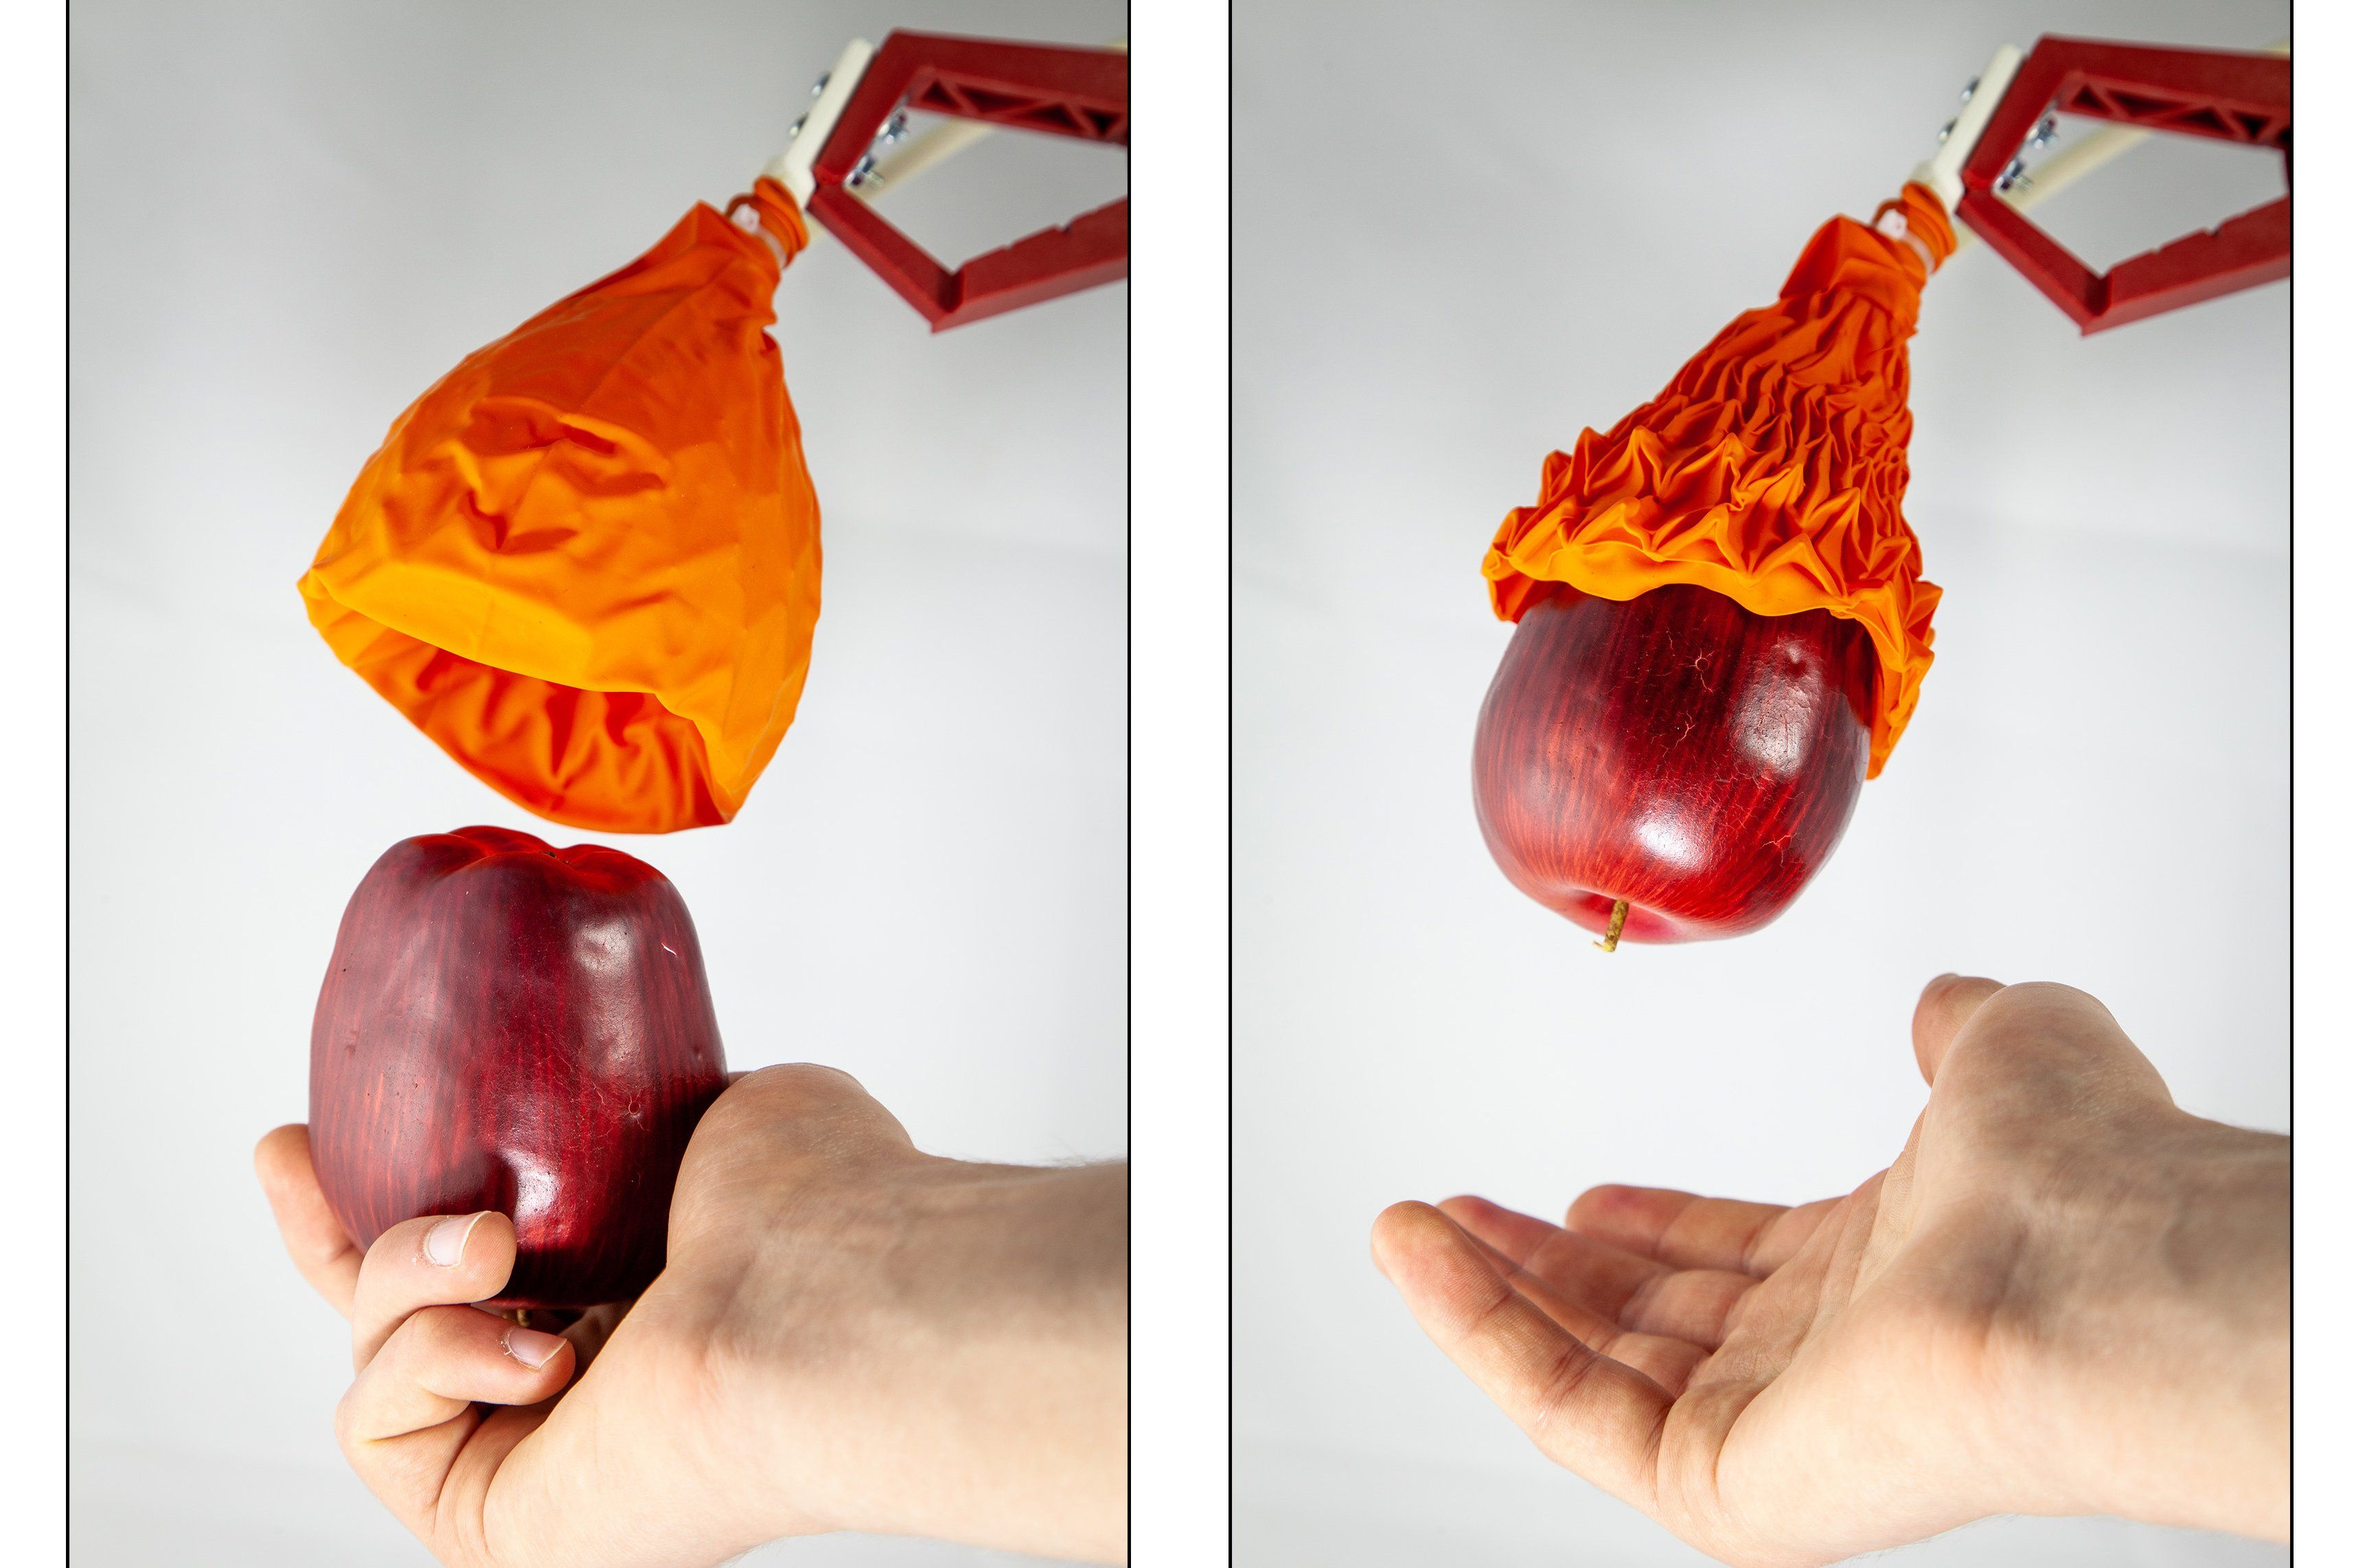 This robotic gripper is incredibly gentle and impressively strong